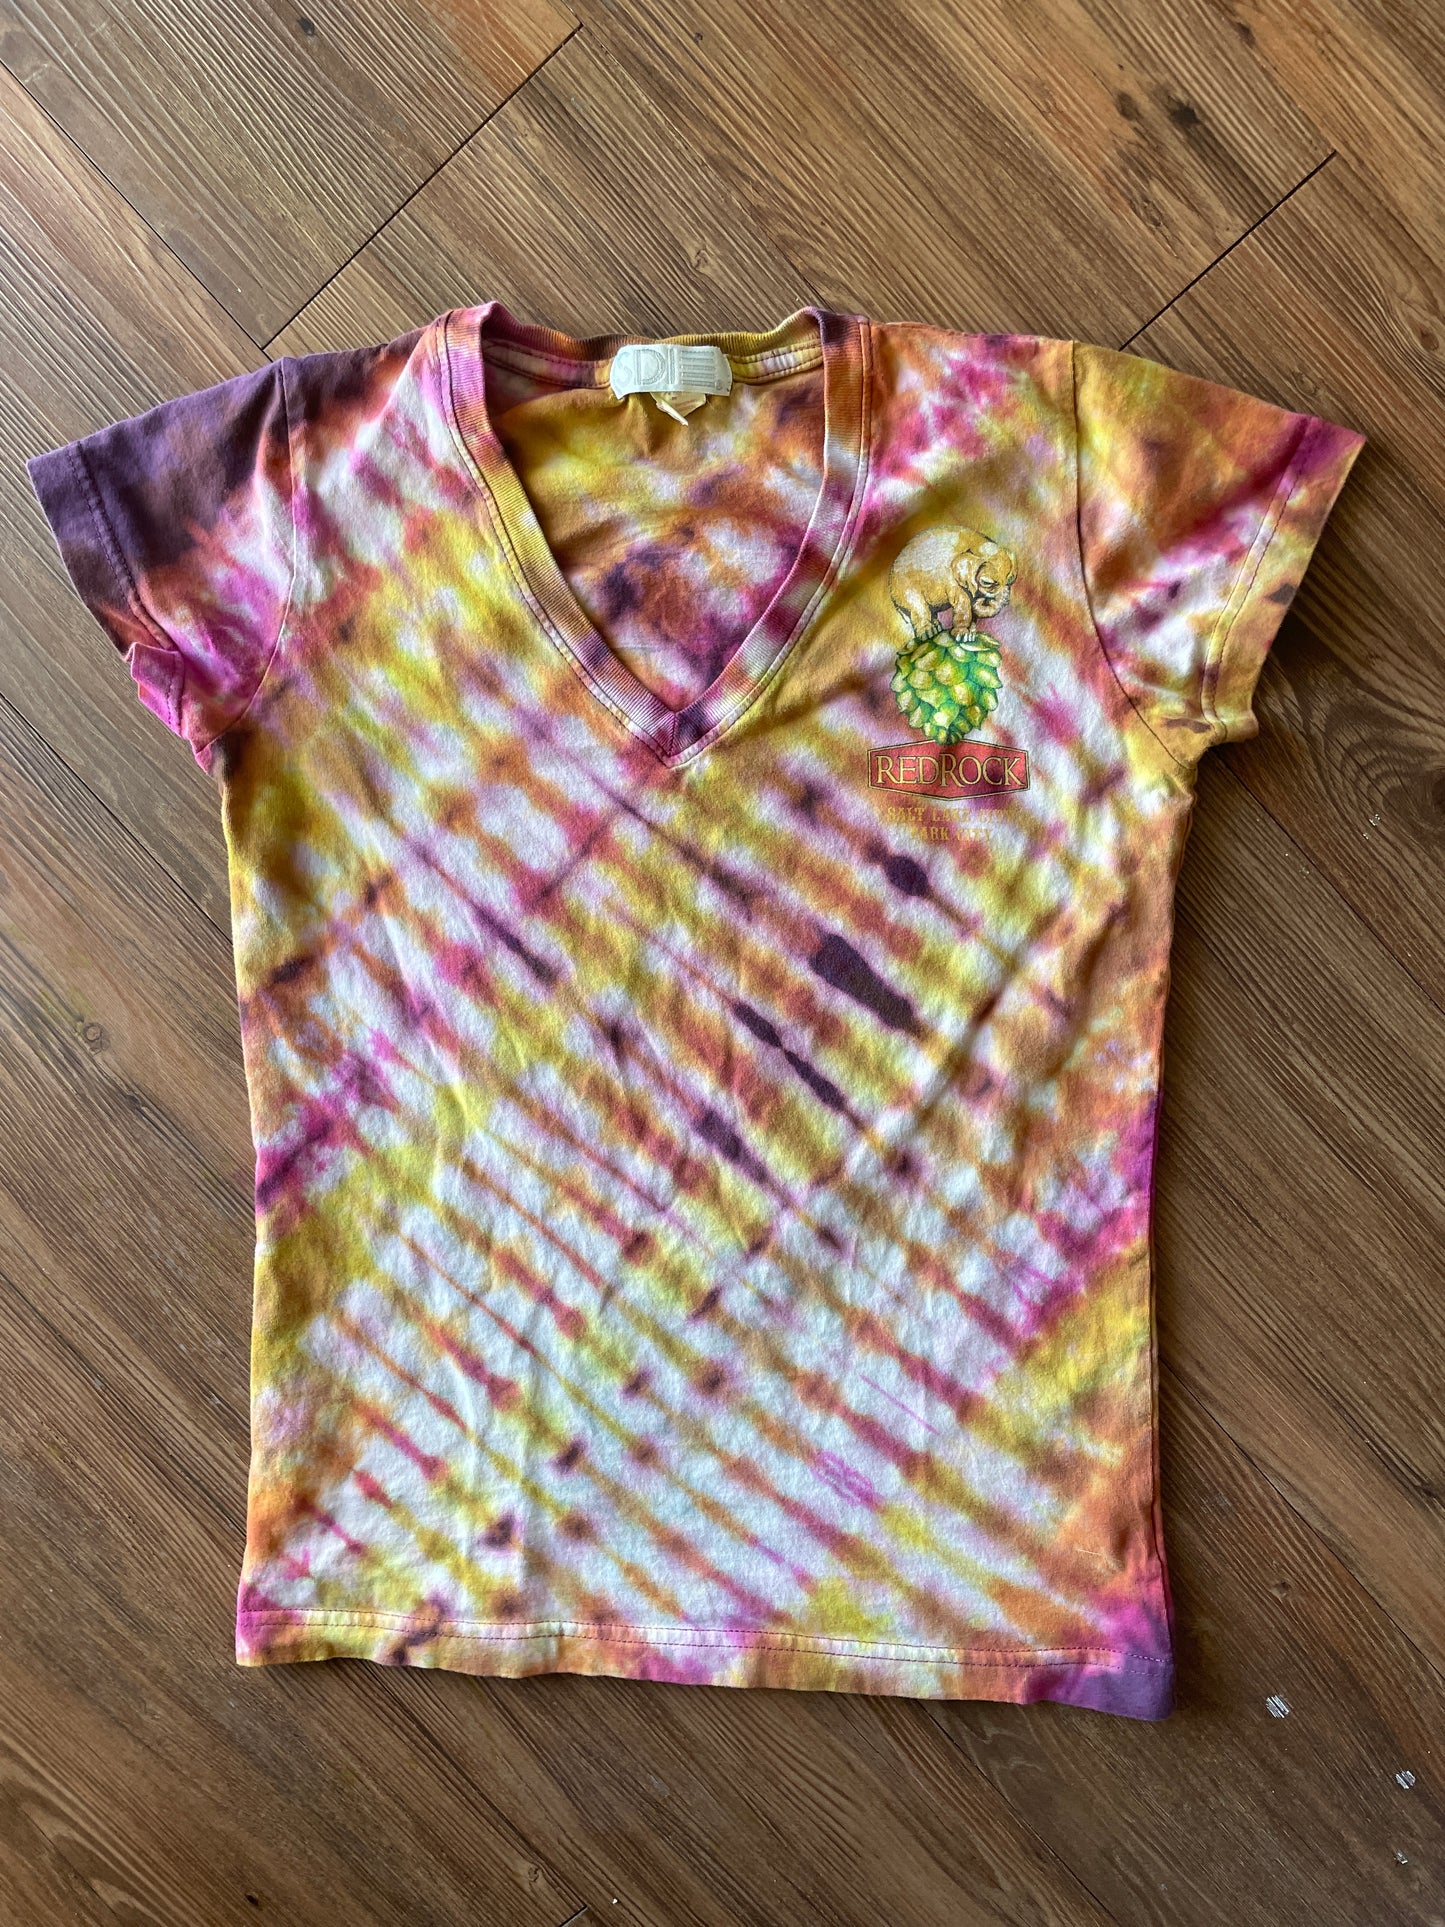 SMALL Women’s Red Rock Brewery Elephino IPA Handmade Tie Dye T-Shirt | One-Of-a-Kind Pink and Orange Pleated Short Sleeve